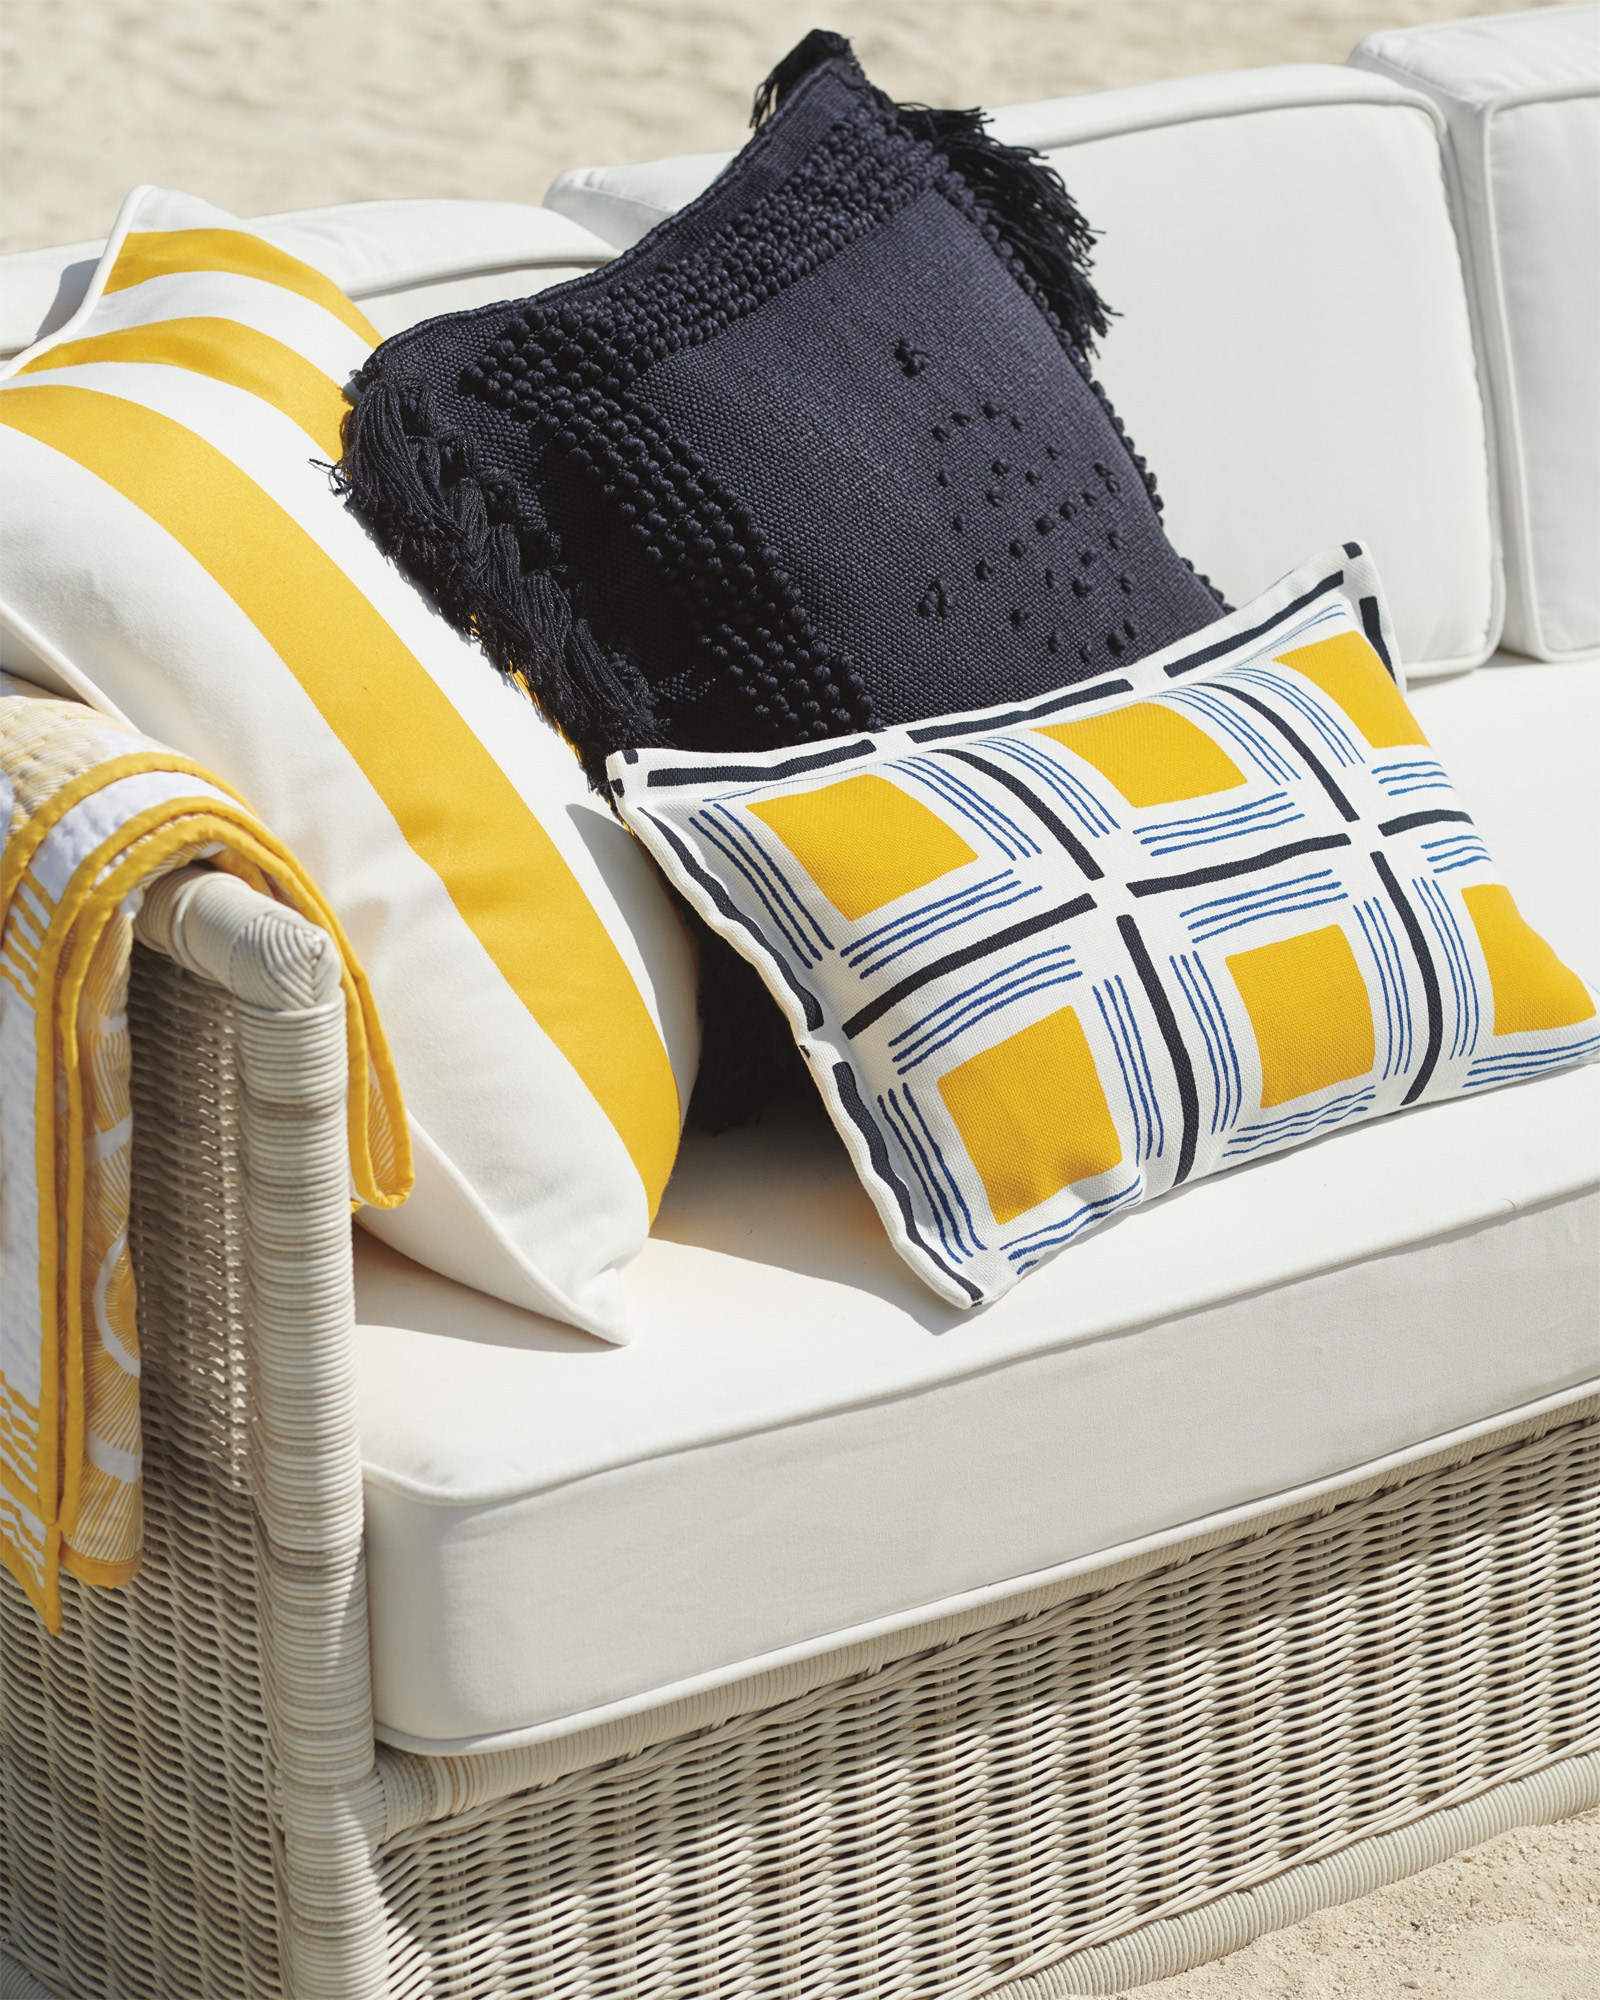 Montecito Outdoor 24"SQ Pillow Cover - Navy - Insert sold separately - Image 3